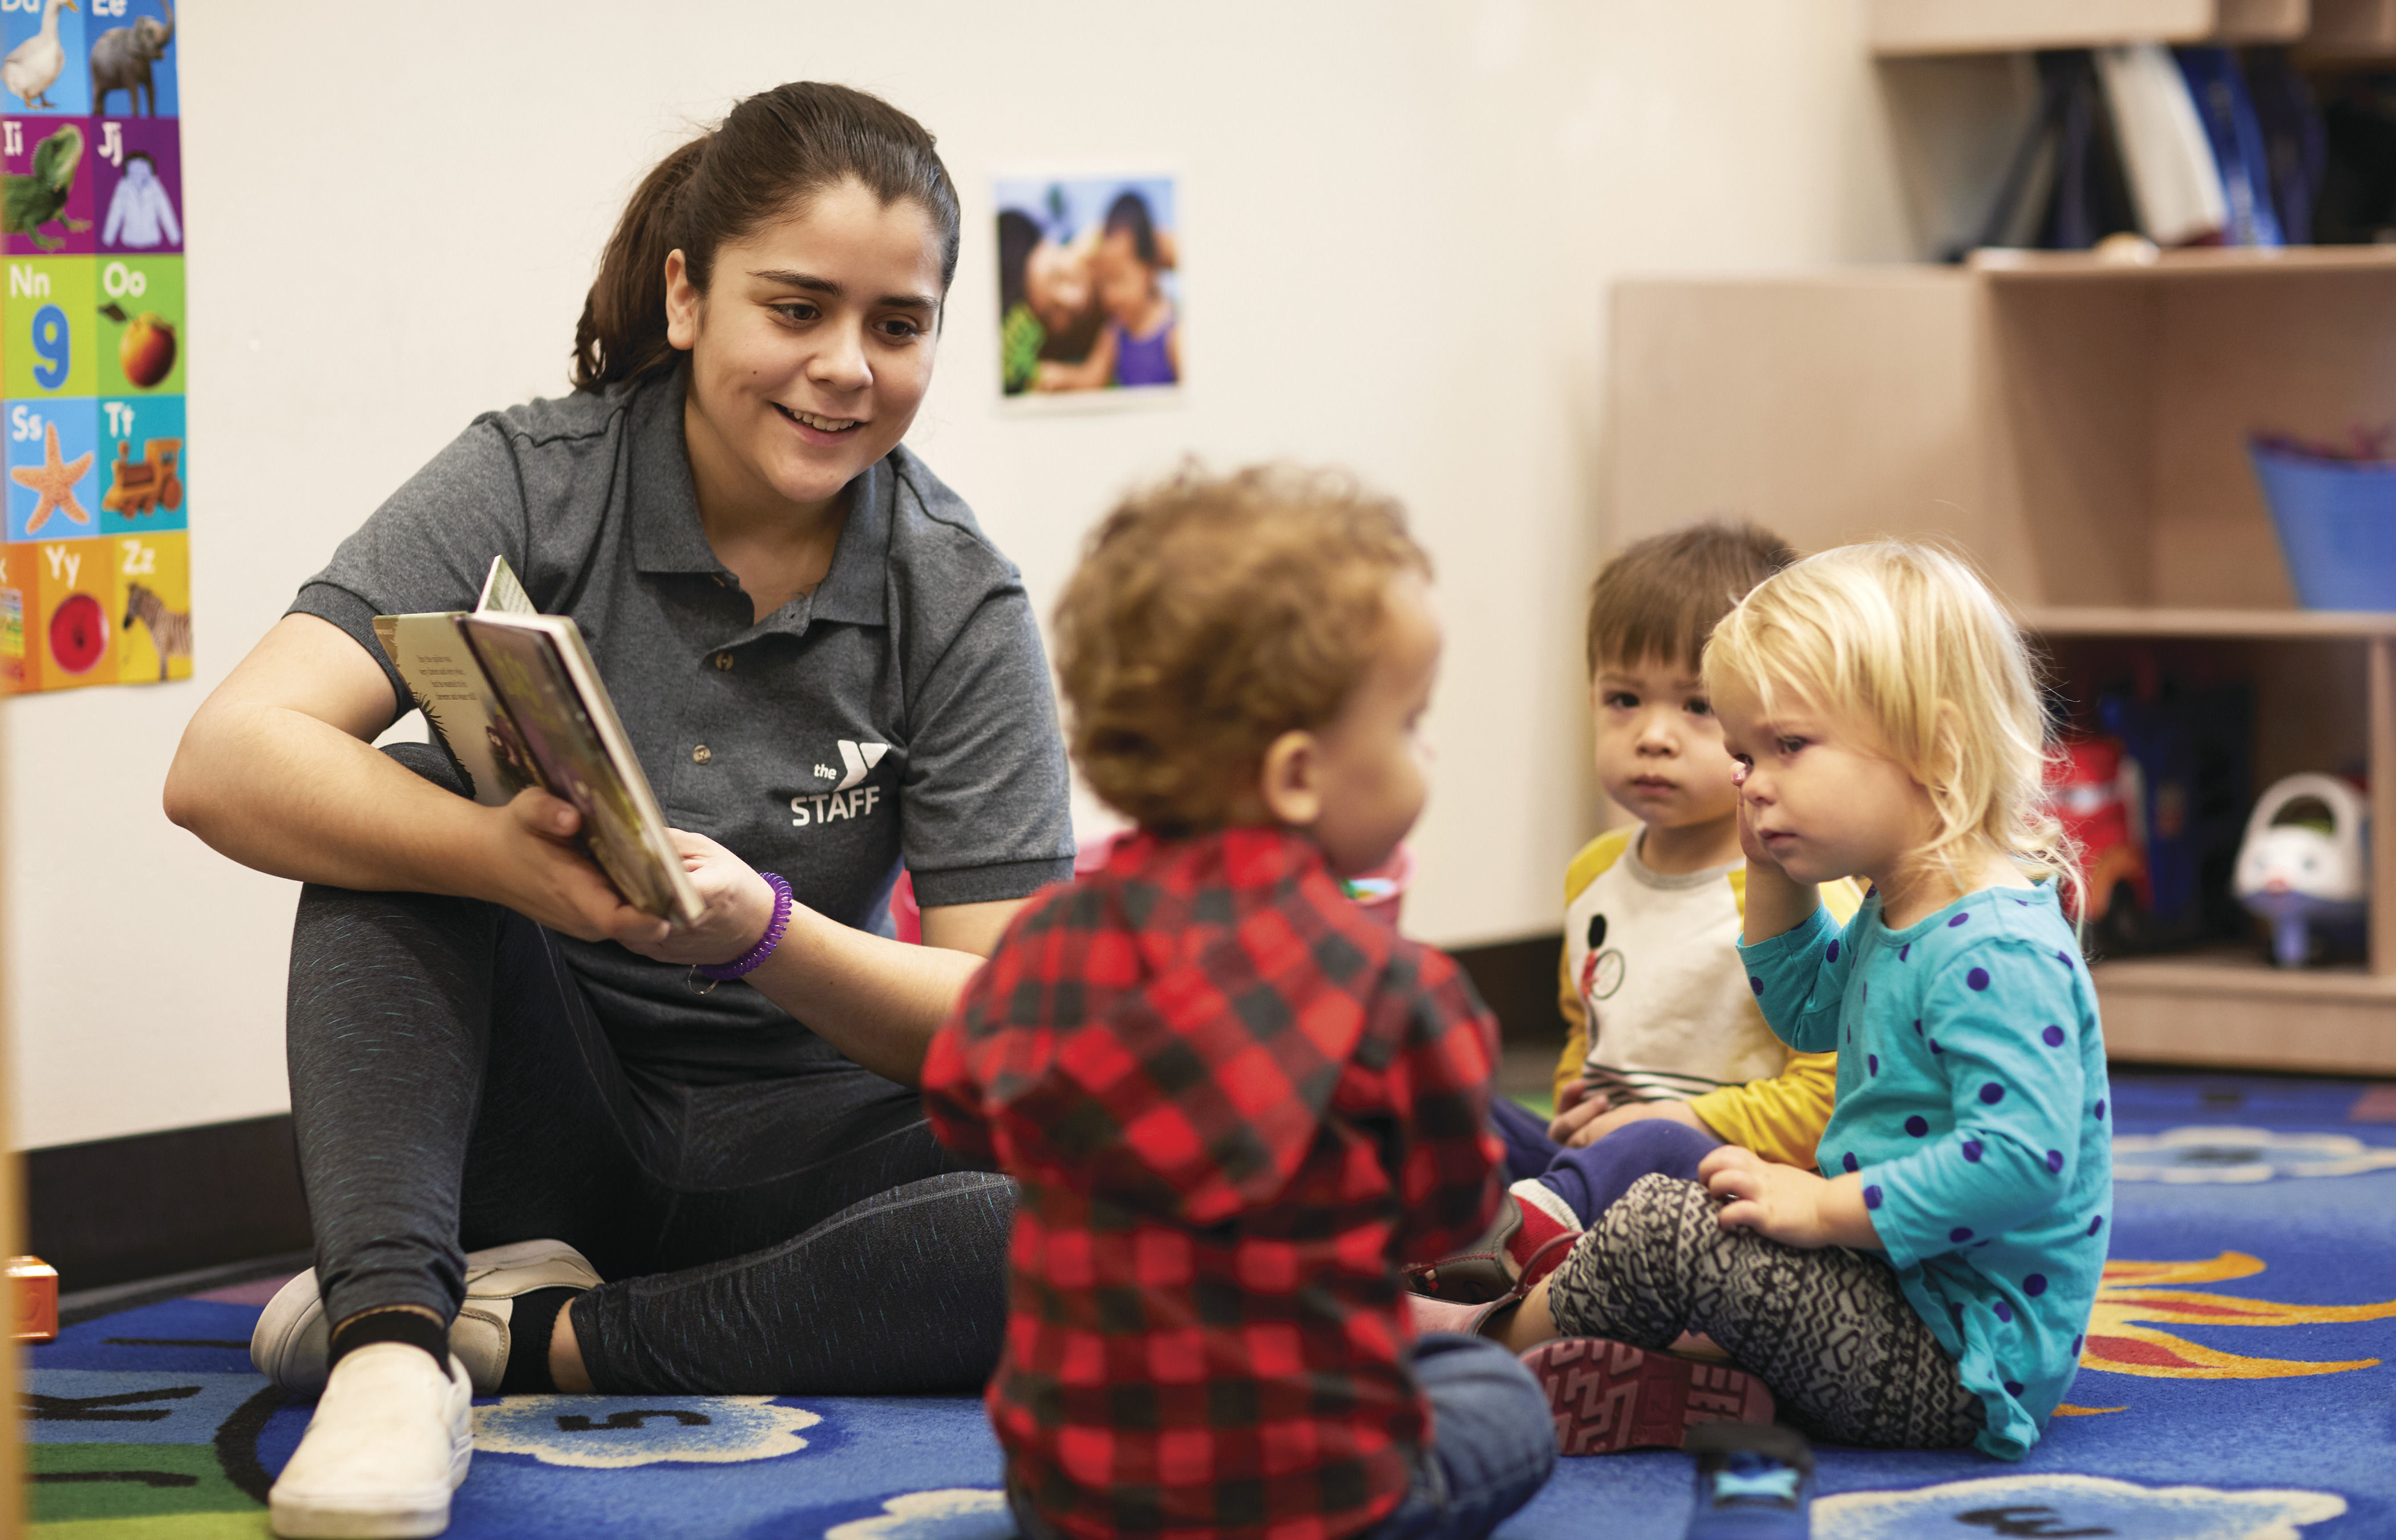 child care learning programs foster physical social emotional development kids infants schoolwork